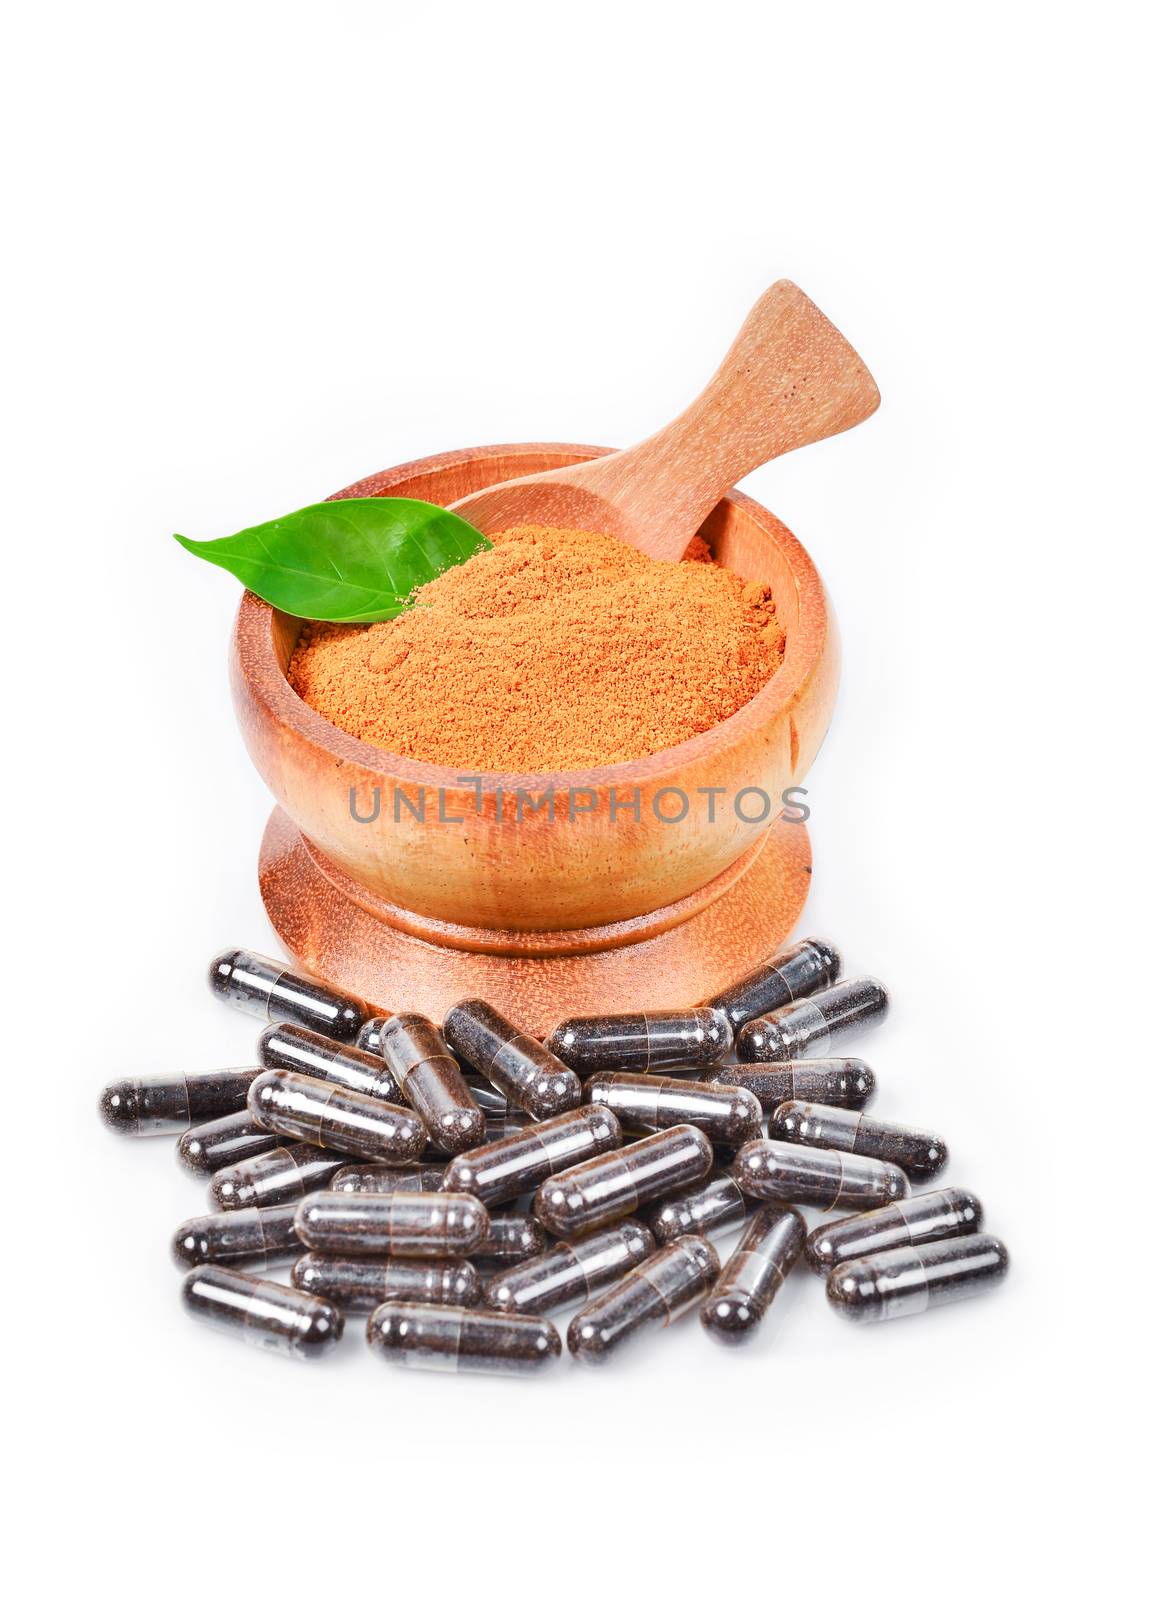 Natural medicine capsule pill with black herb, and wooden mortar on white background for alternative medical concept.